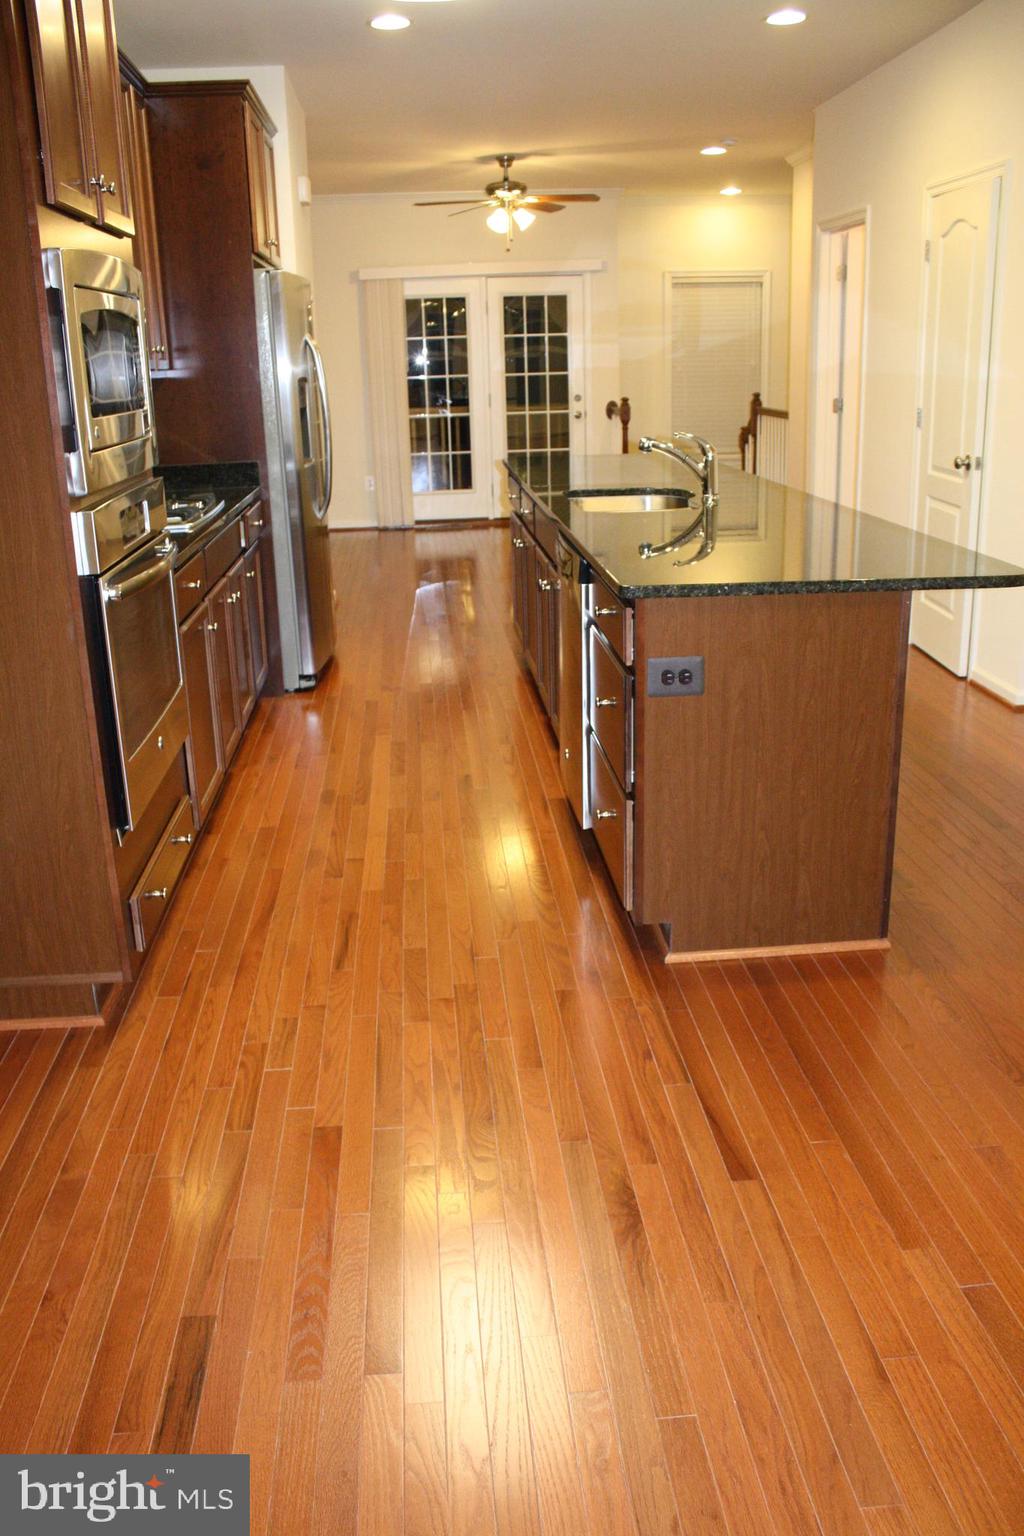 a kitchen with stainless steel appliances wooden floor and large windows